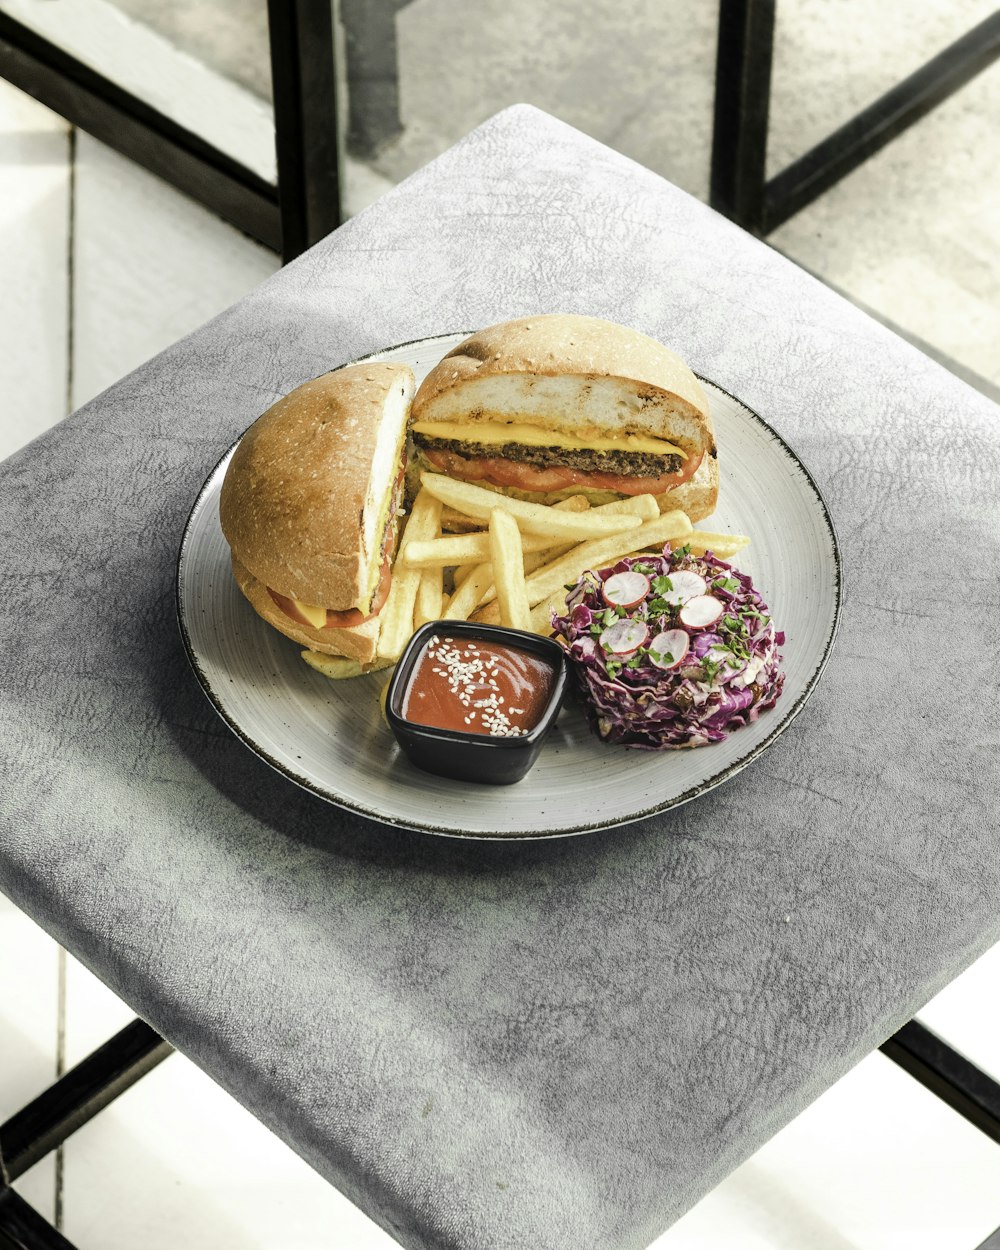 a plate with a sandwich and french fries on it